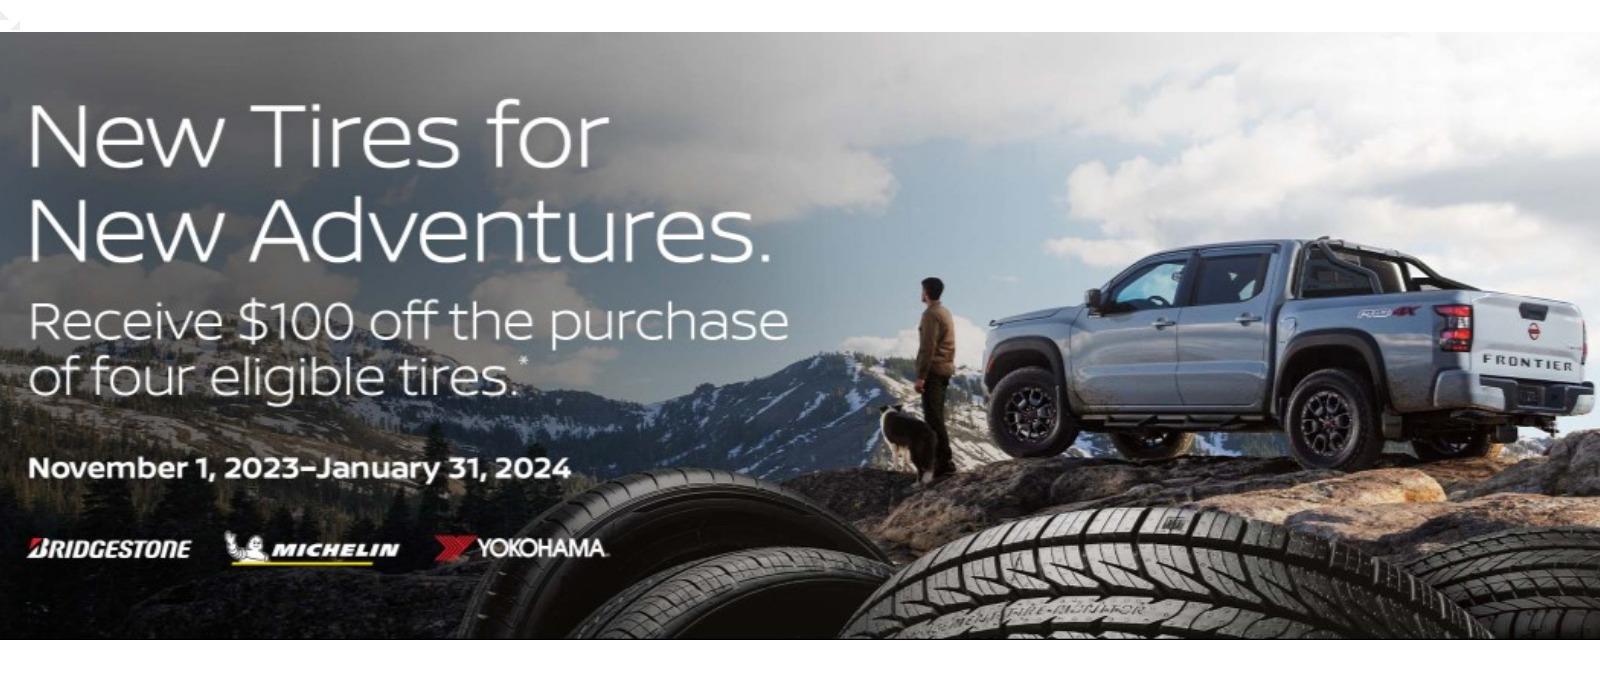 New Tires for New Adventures. Receive $100 off the purchase of four eligible tires. November 1, 2023-January 31, 2024